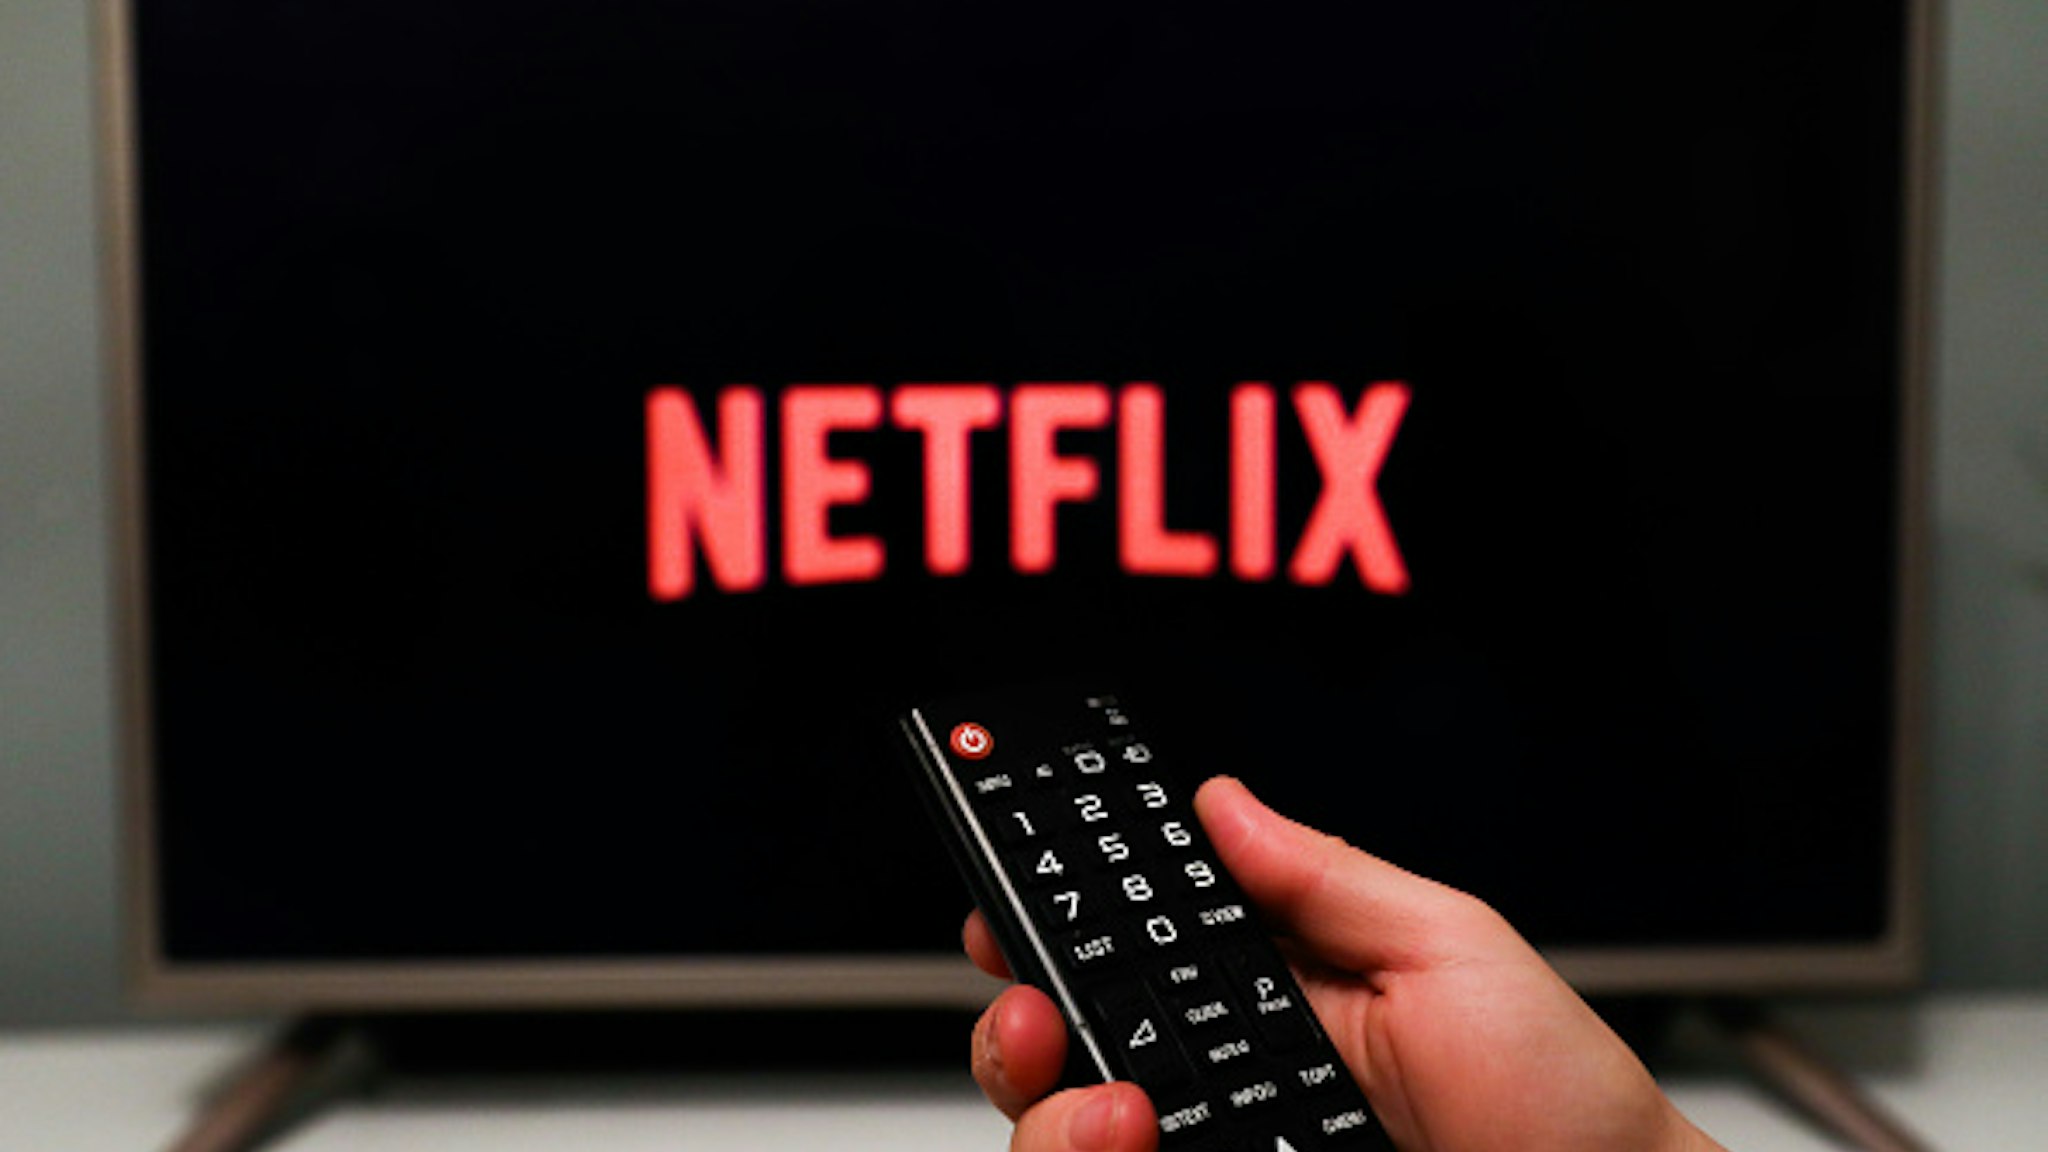 Netflix logo is seen displayed on a tv screen in this illustration photo taken in Poland on November 29, 2020.